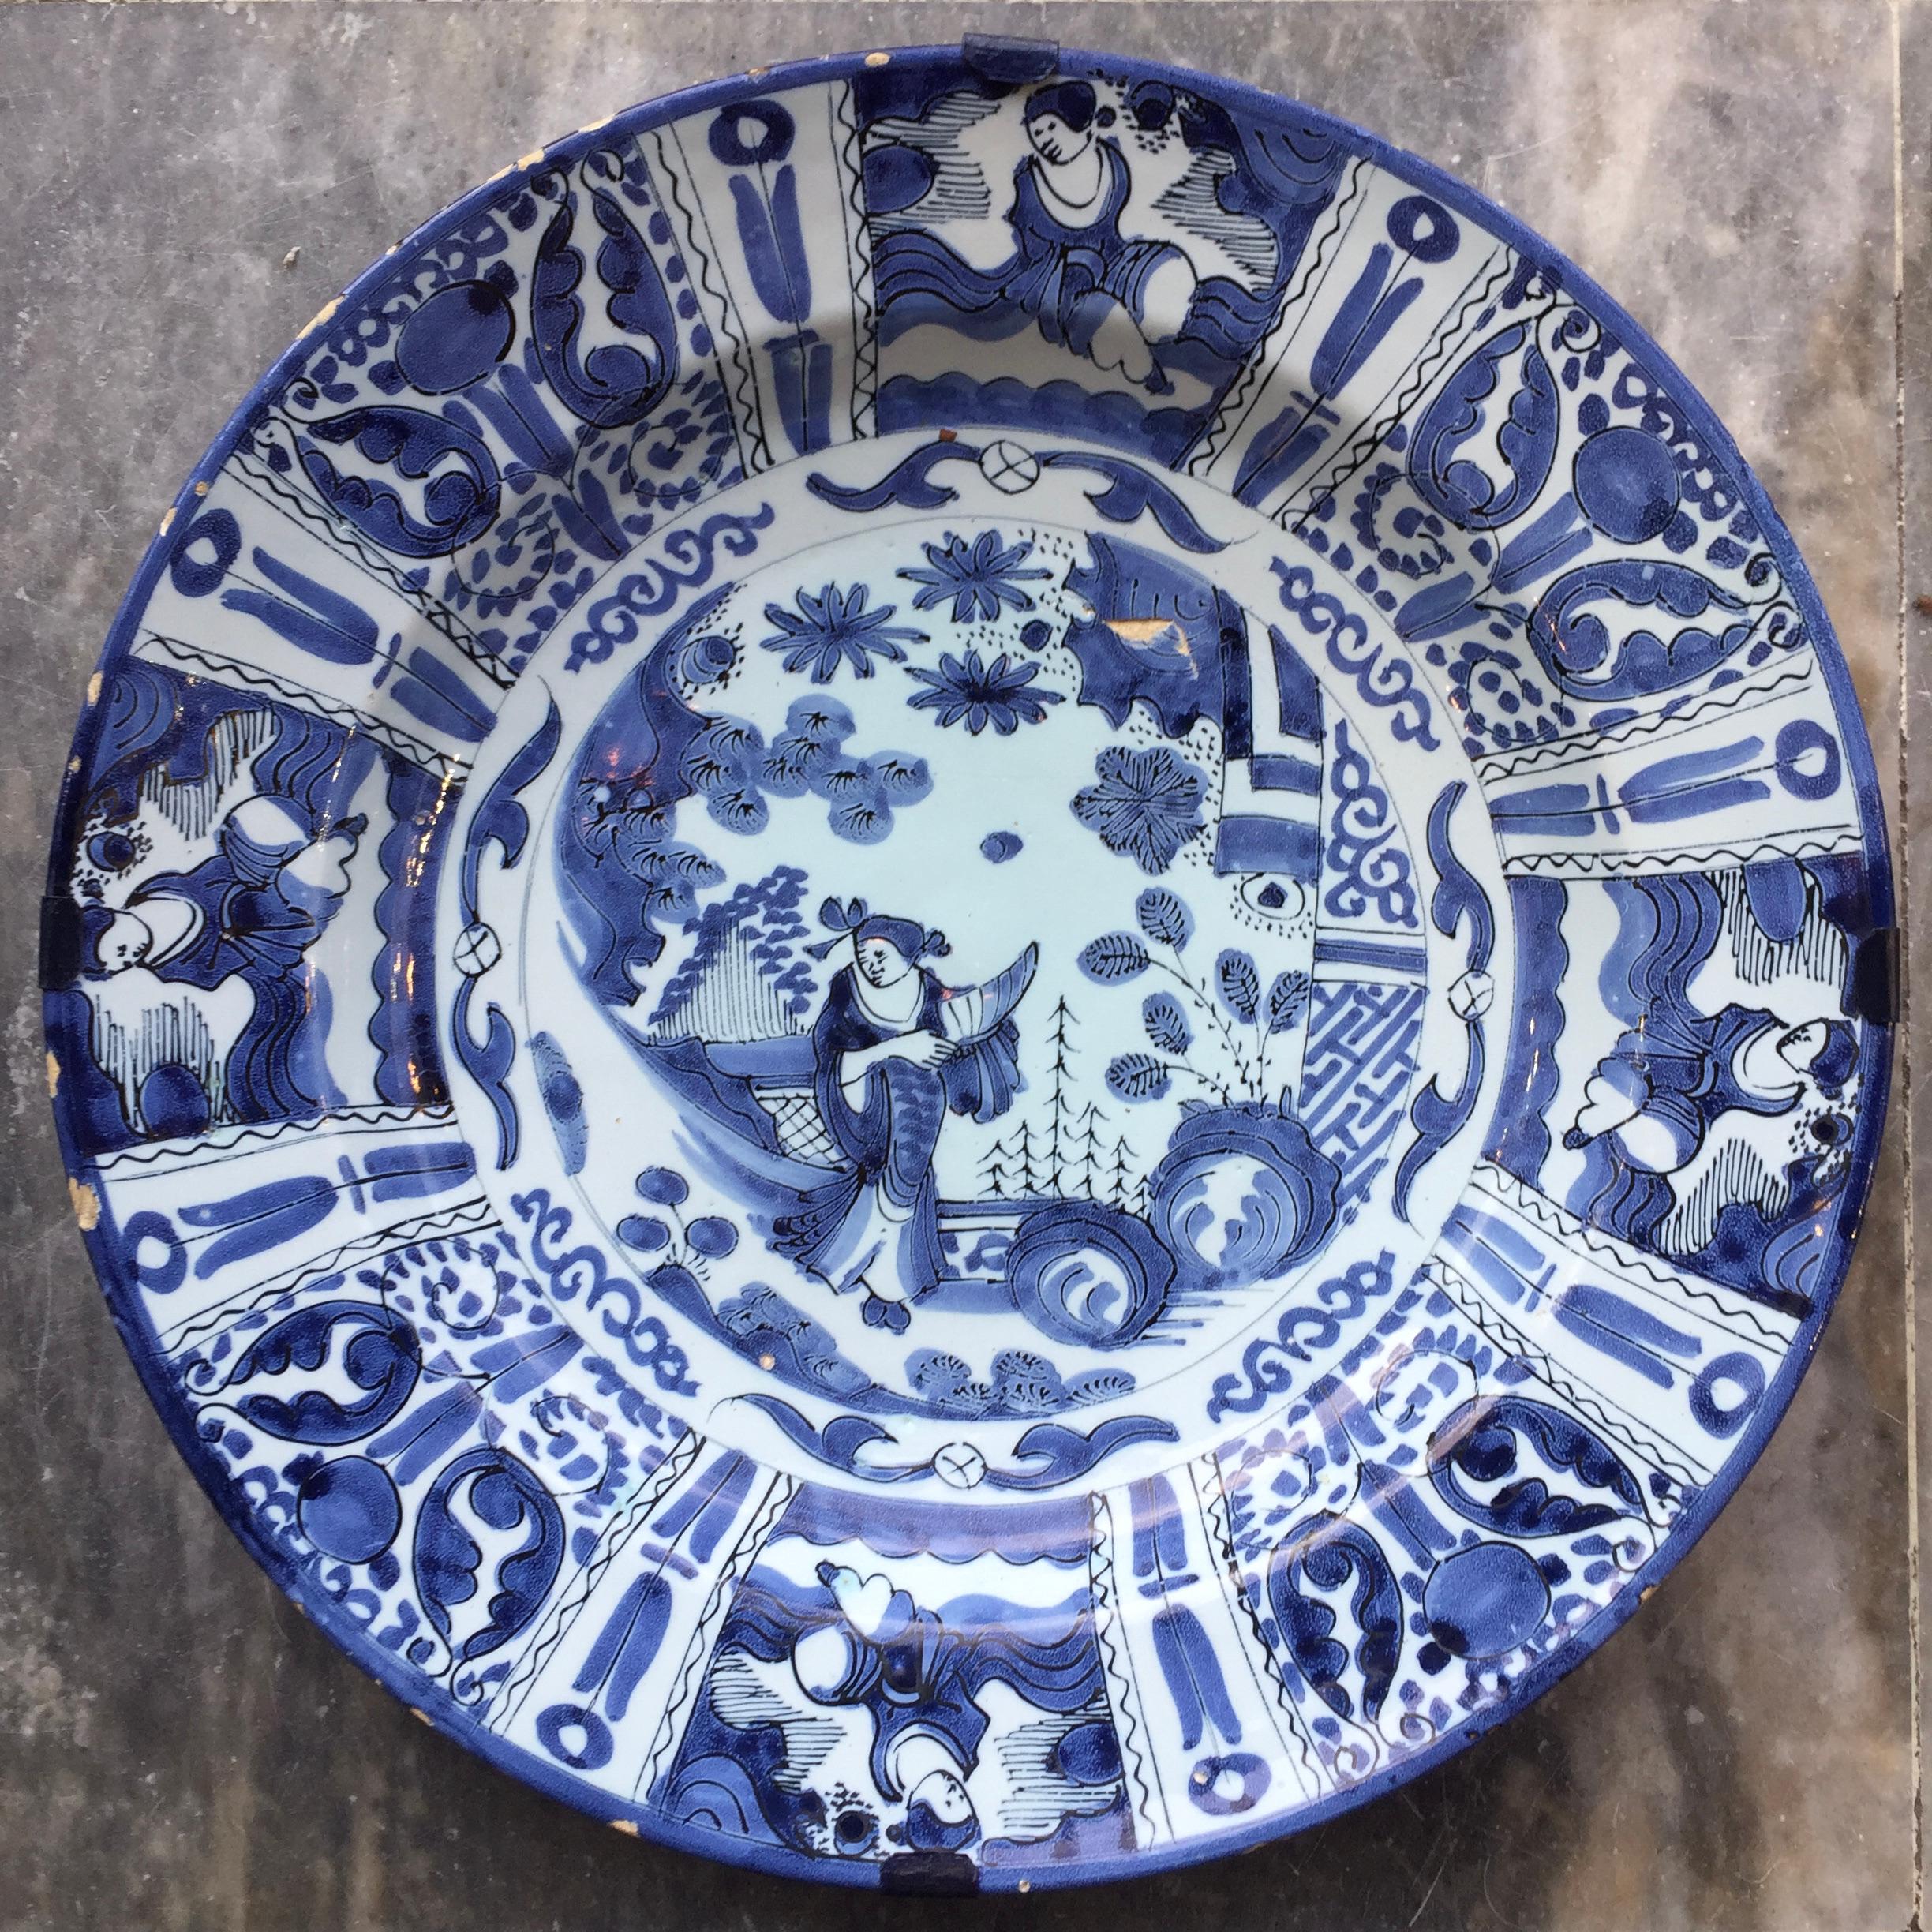 City: Delft
Workshop: Unknown
Date: Last quarter of the 17th century

A large blue and white plate in Wanli / Tianqi style
Decorated with a Chinese figure in the center surrounded by eight cartouches with flowers and figures.
Exact copy of the